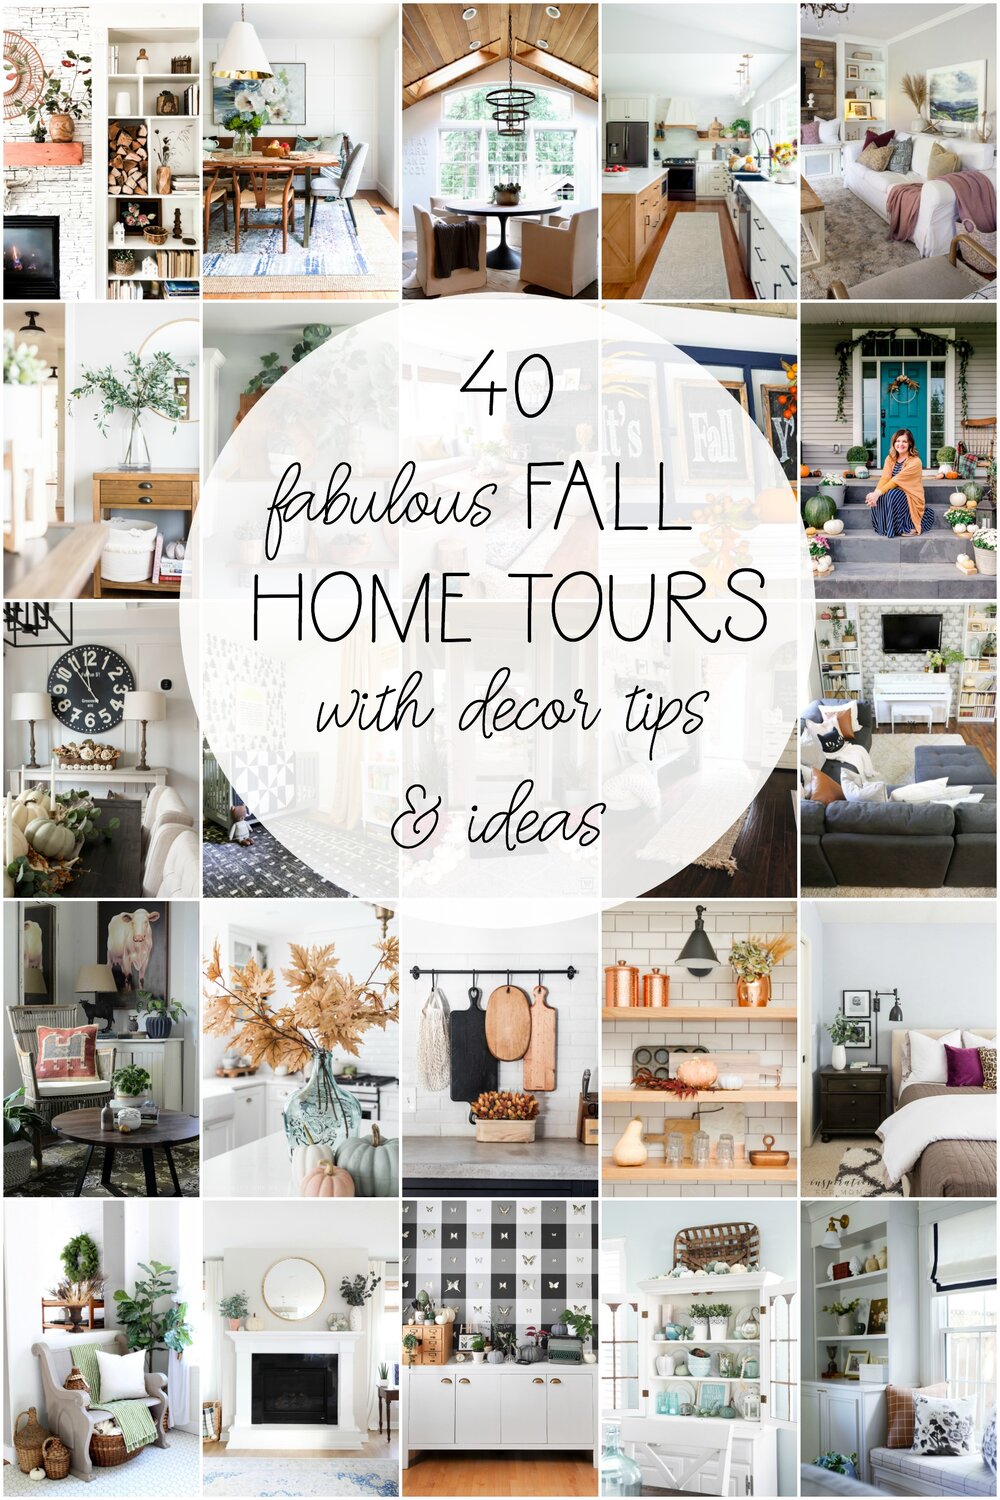 40 fabulous fall home tours full of great decor tips and ideas .jpg